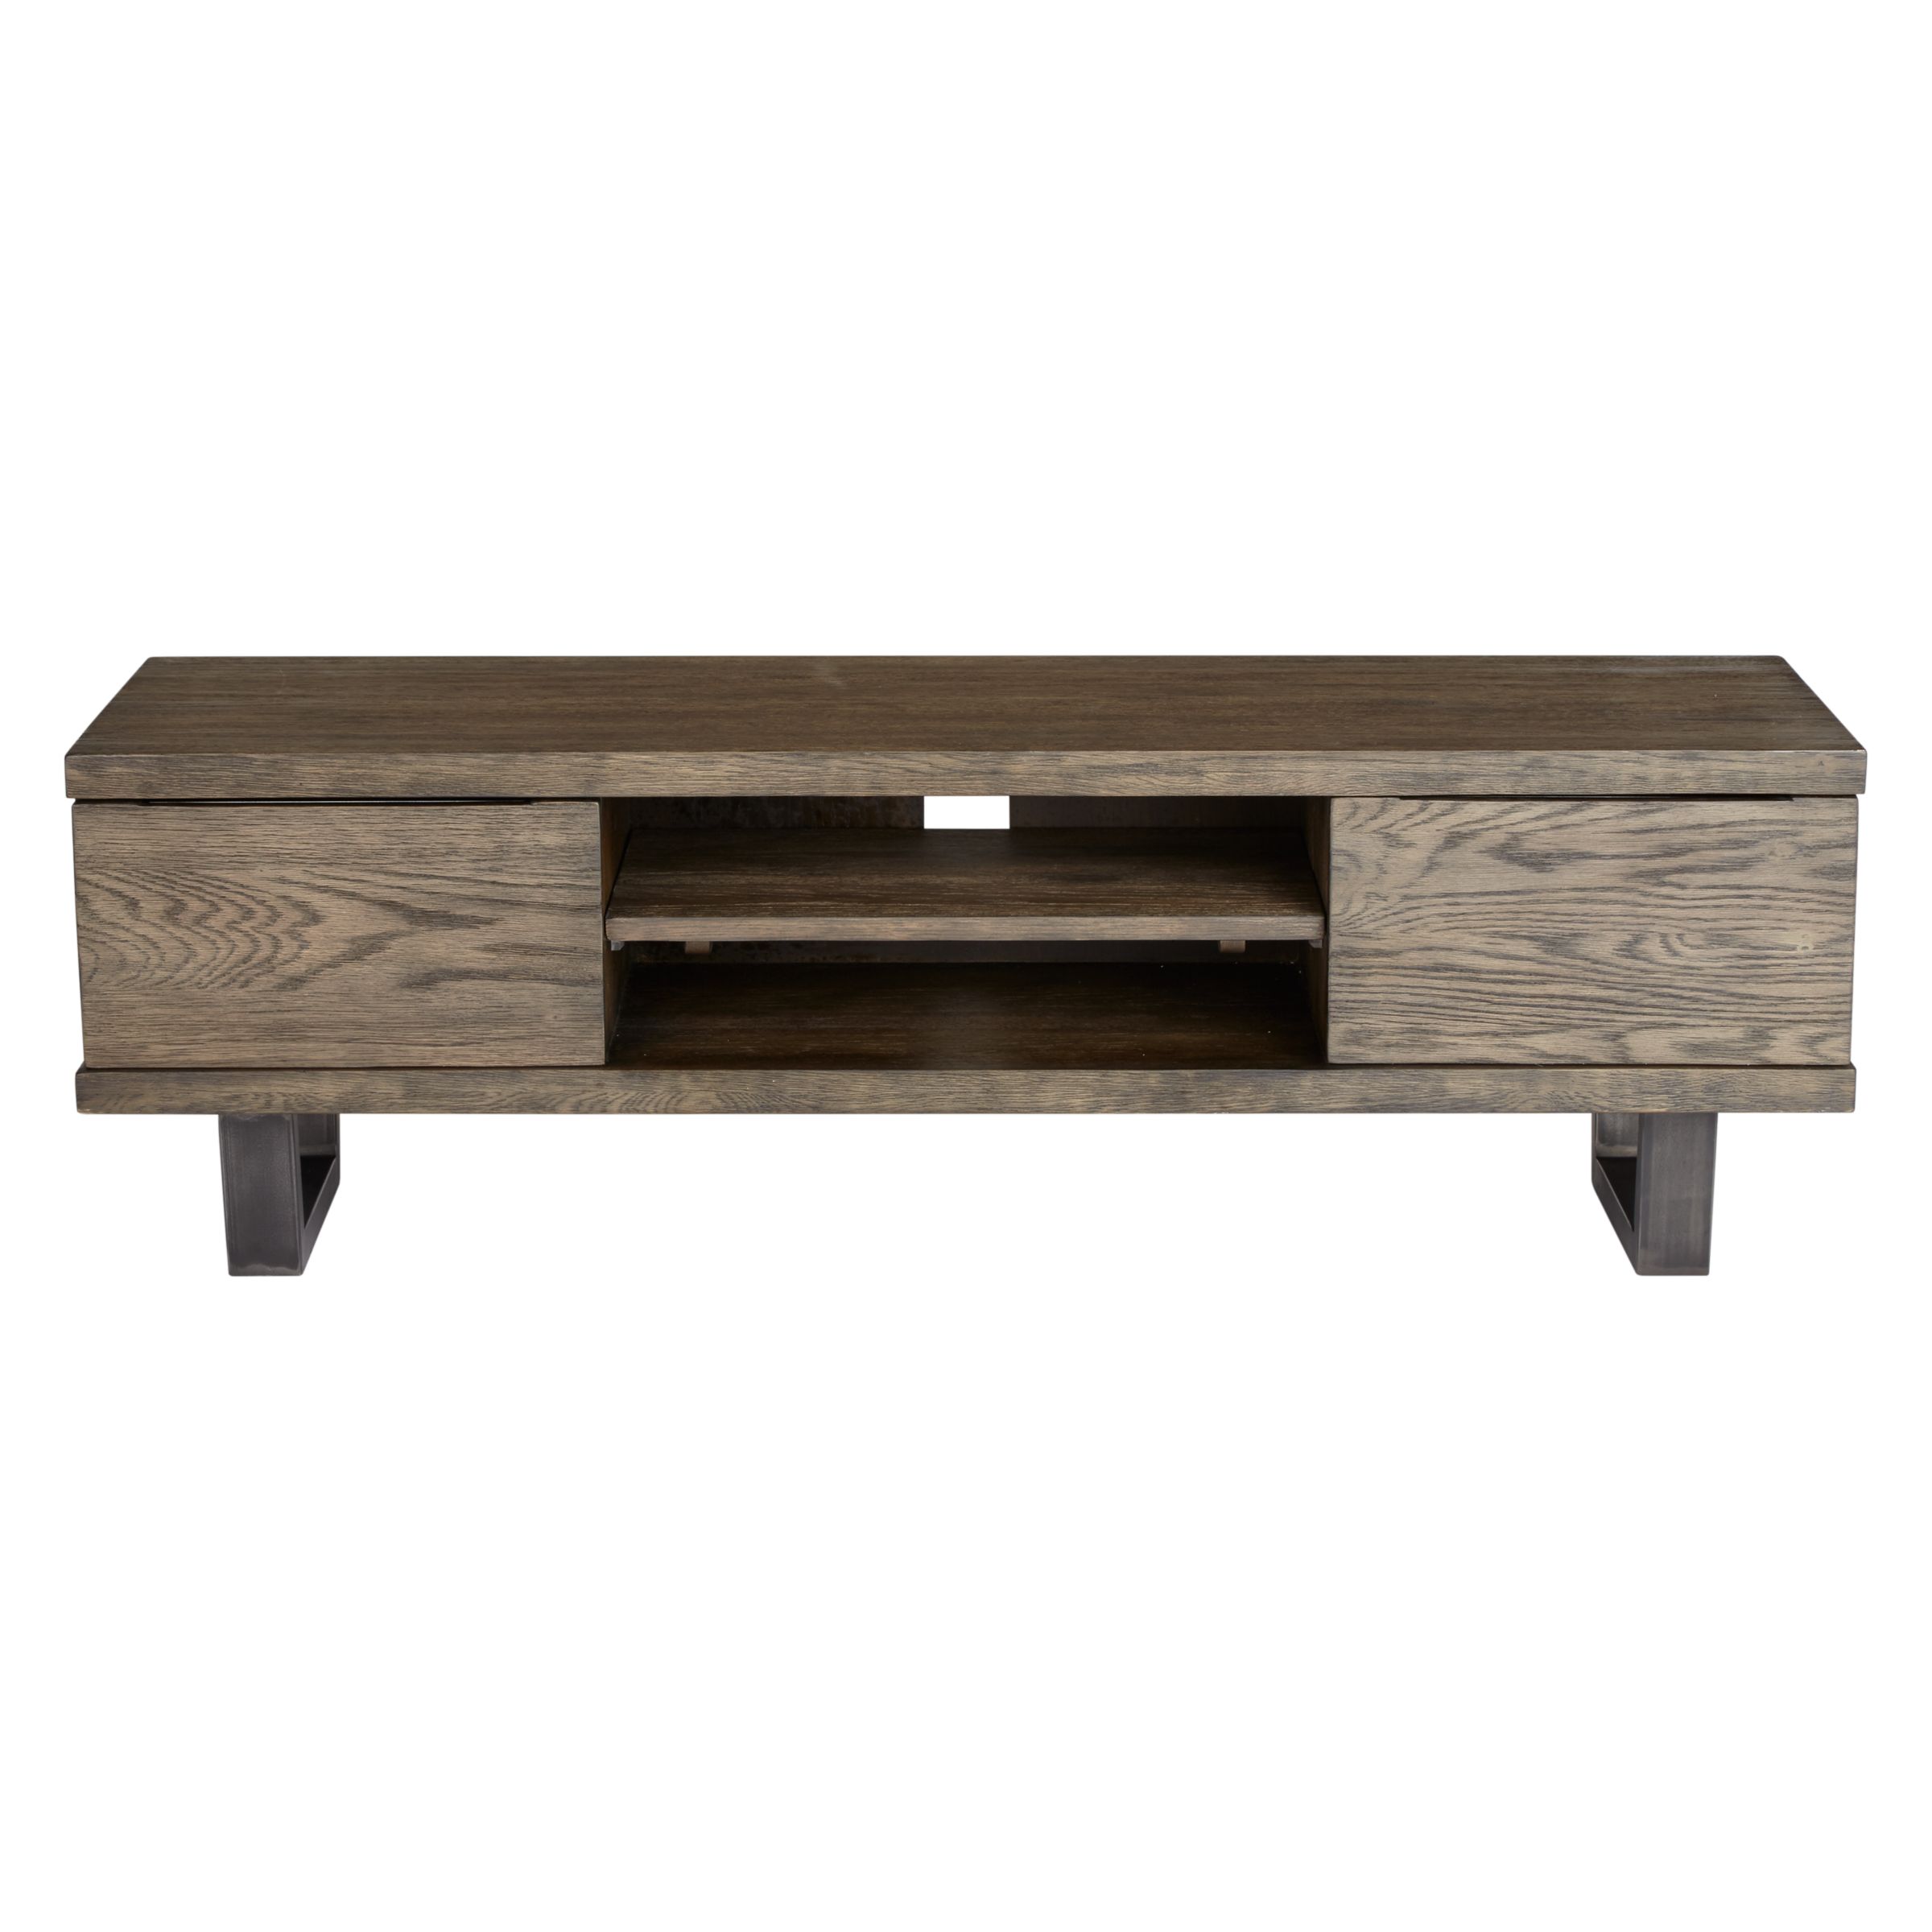 John Lewis Calia TV Stand for TVs up to 60